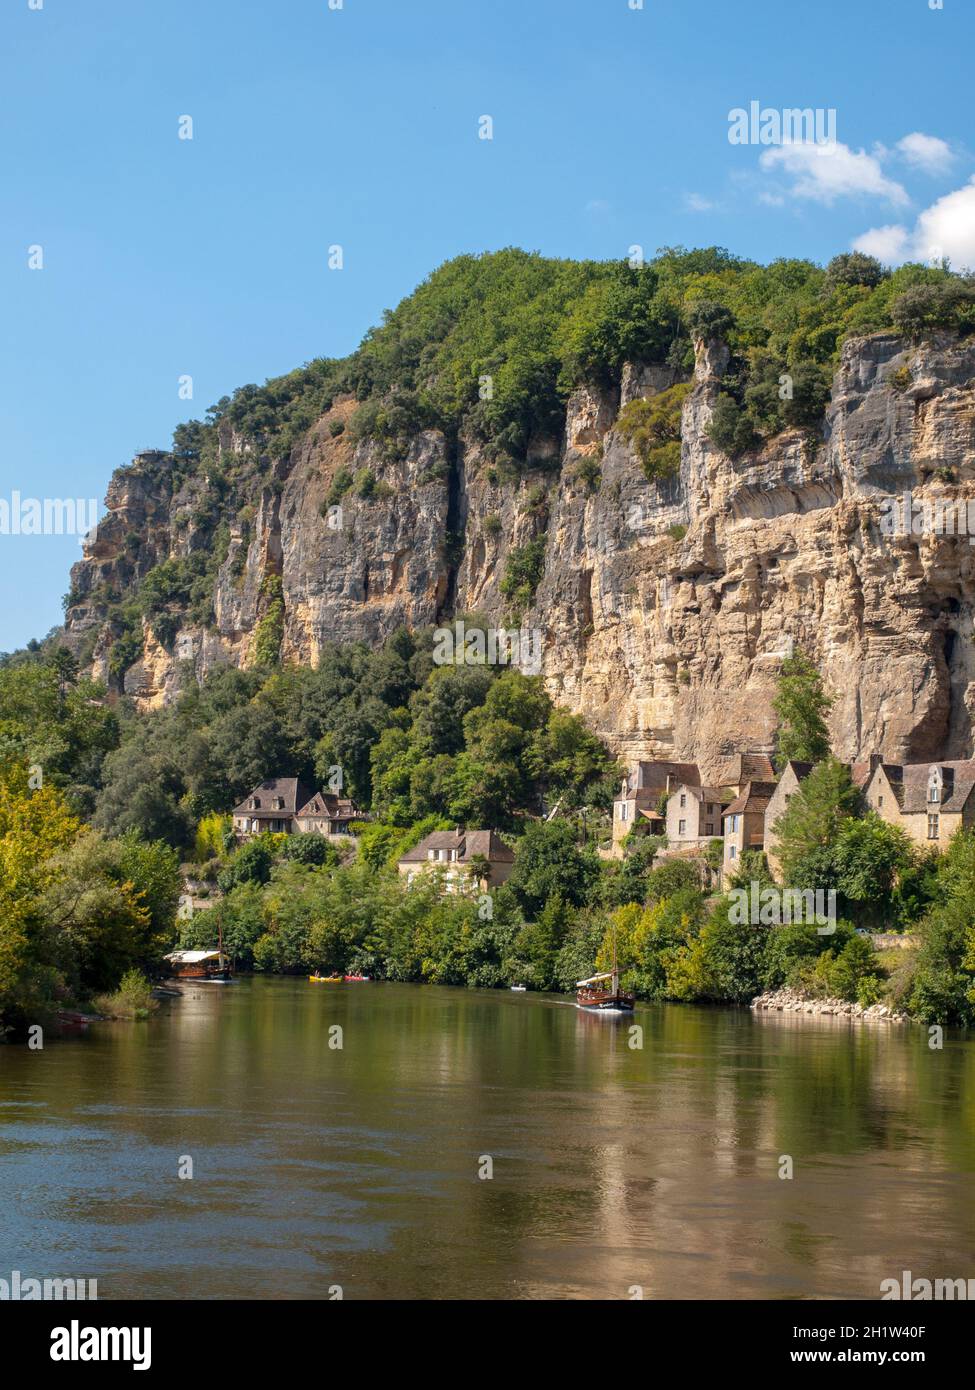 La Roque-Gageac, Dordogne, France - September 7, 2018: Canoeing and tourist boat, in French called gabare, on the river Dordogne at La Roque-Gageac an Stock Photo